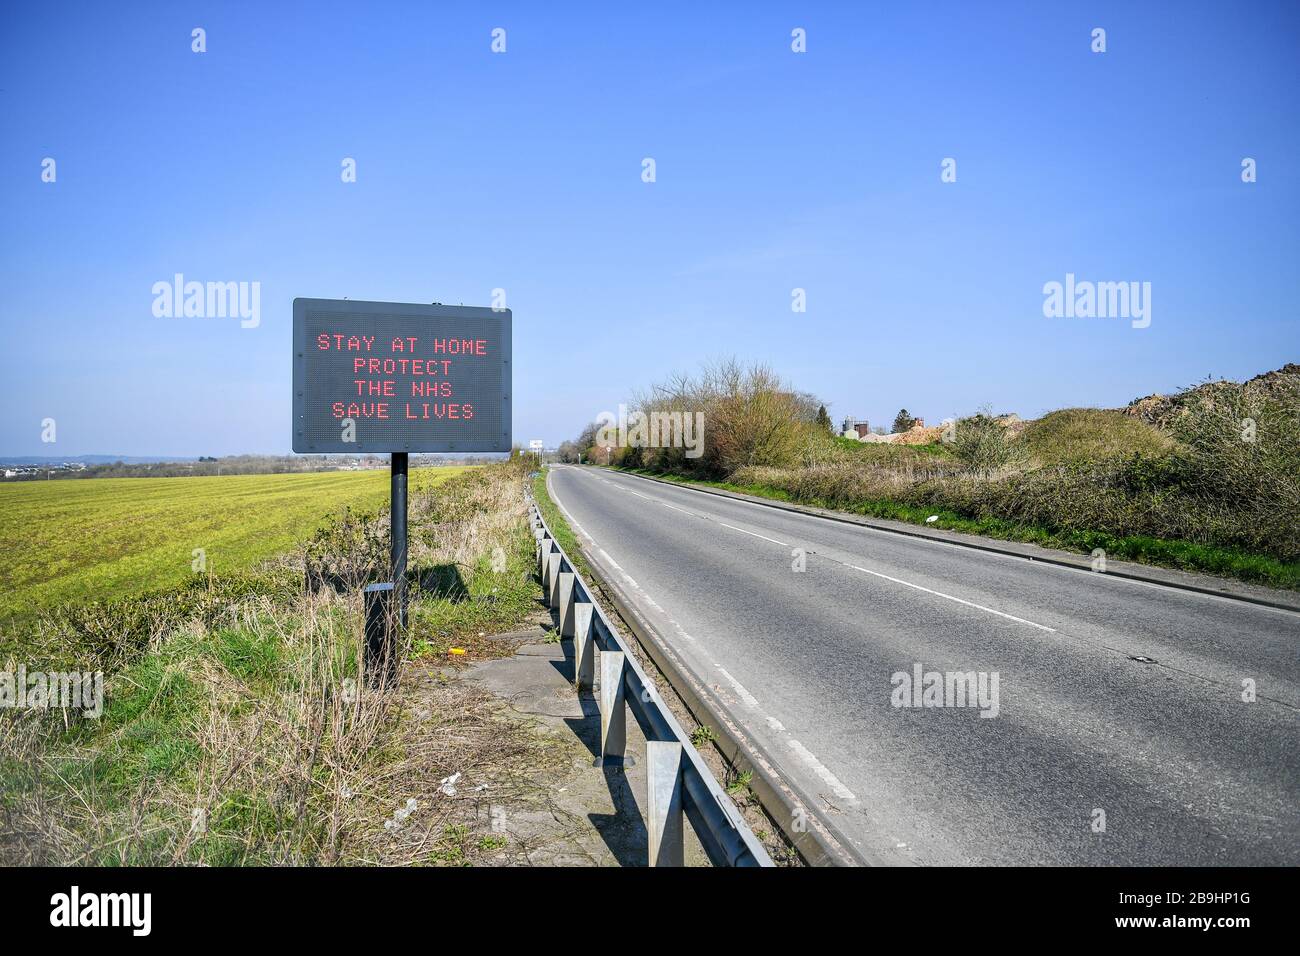 A matrix road sign on the A367 into Bath advises motorists to stay at home to protect the NHS and save lives the day after Prime Minister Boris Johnson put the UK in lockdown to help curb the spread of the coronavirus. Stock Photo